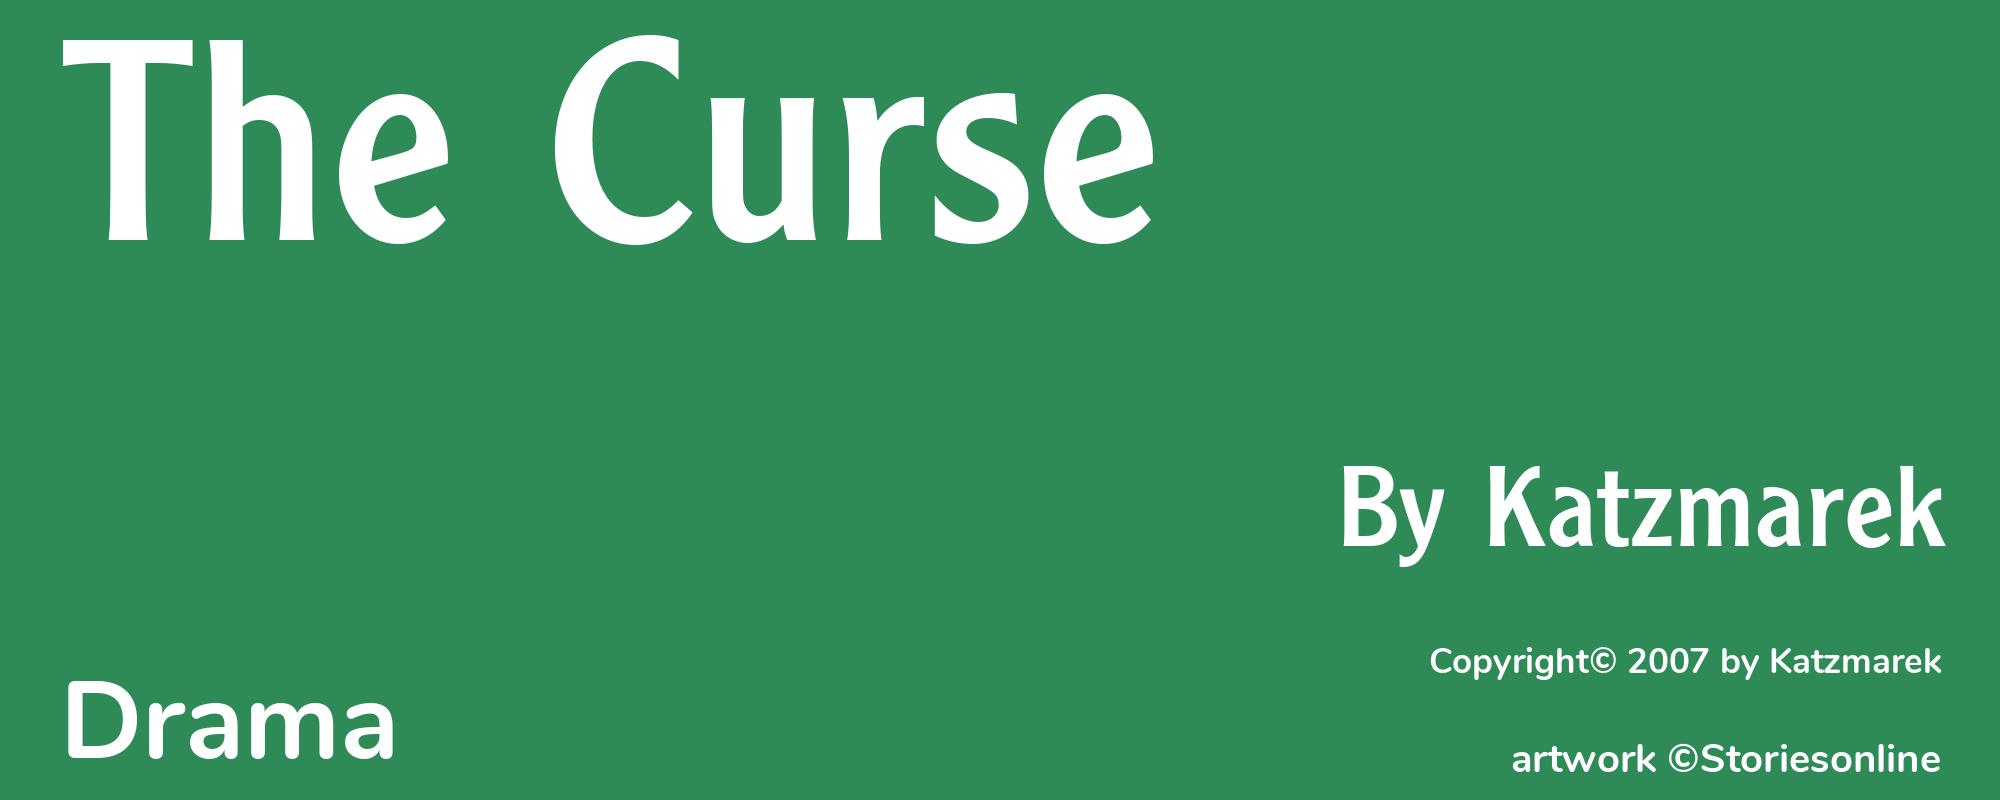 The Curse - Cover